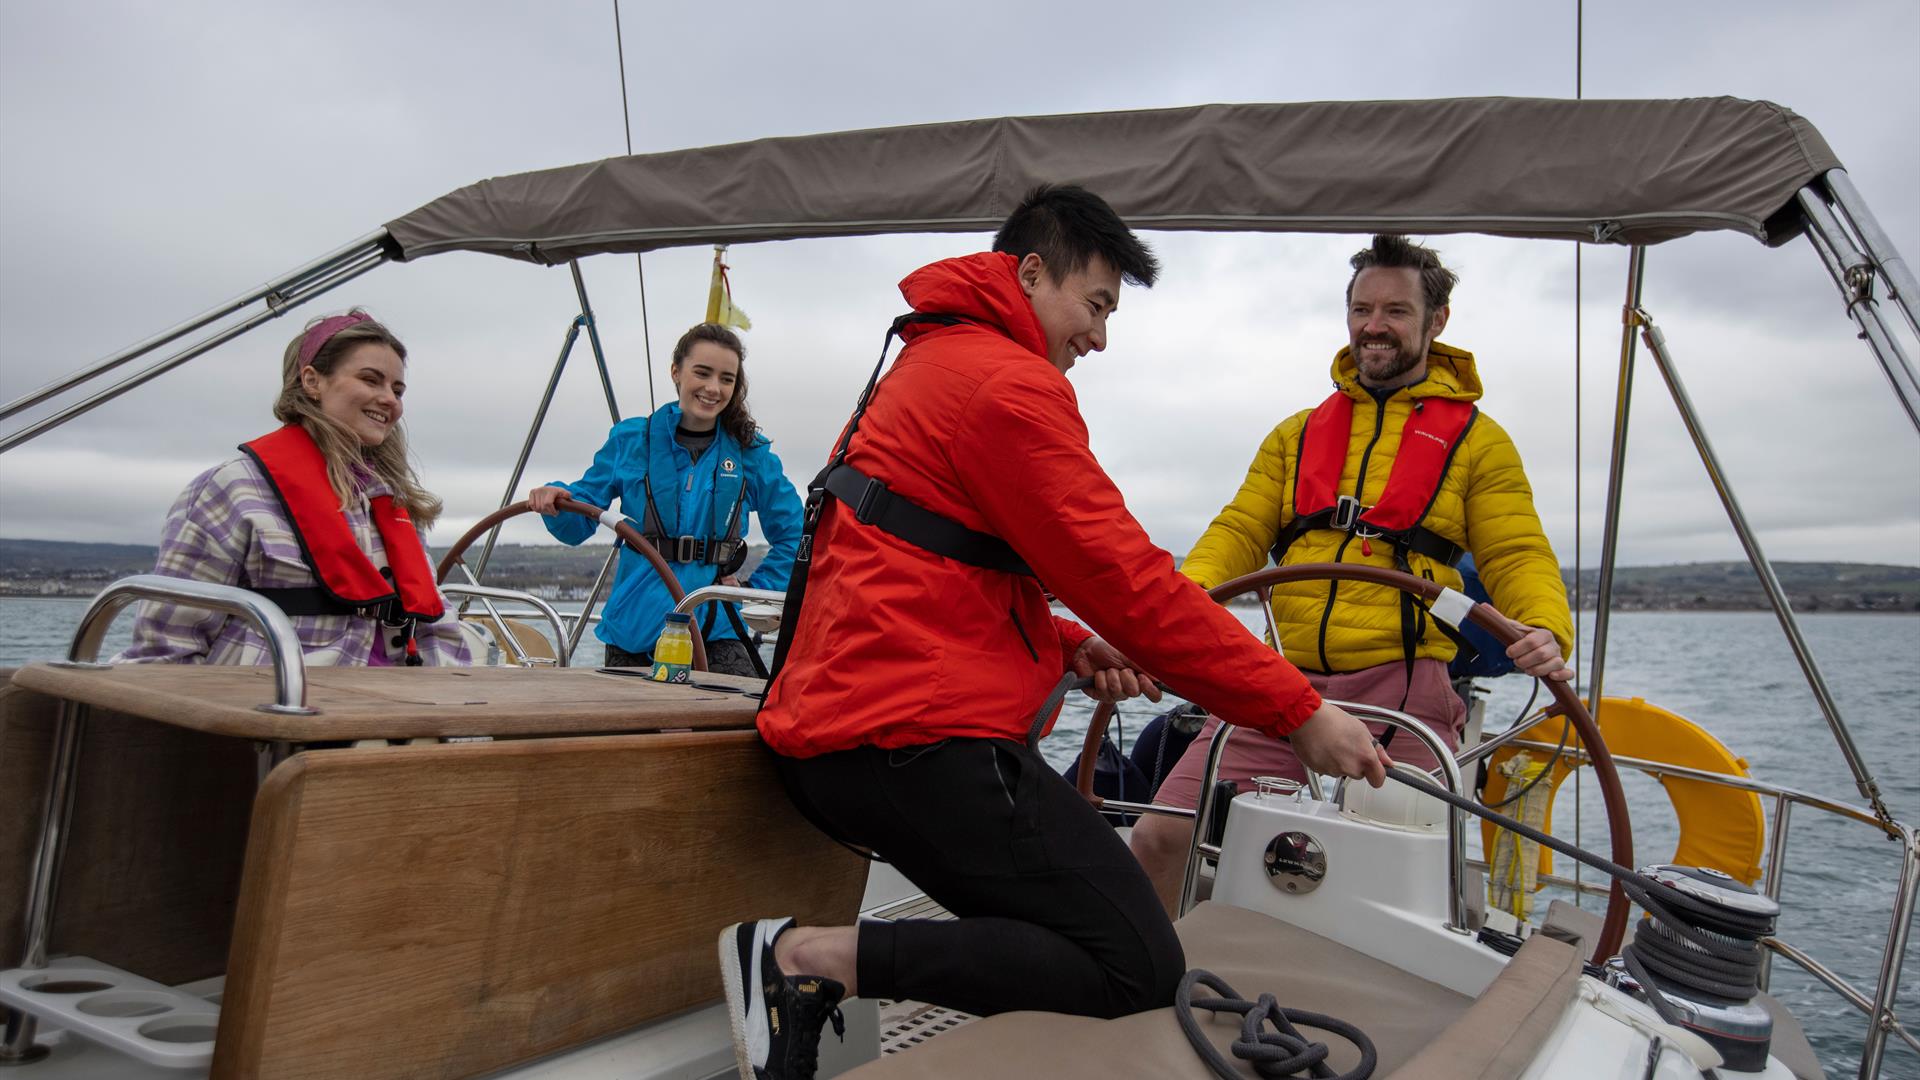 Group learn the ropes of sailing through the Sailing in the Wake of Giants experience